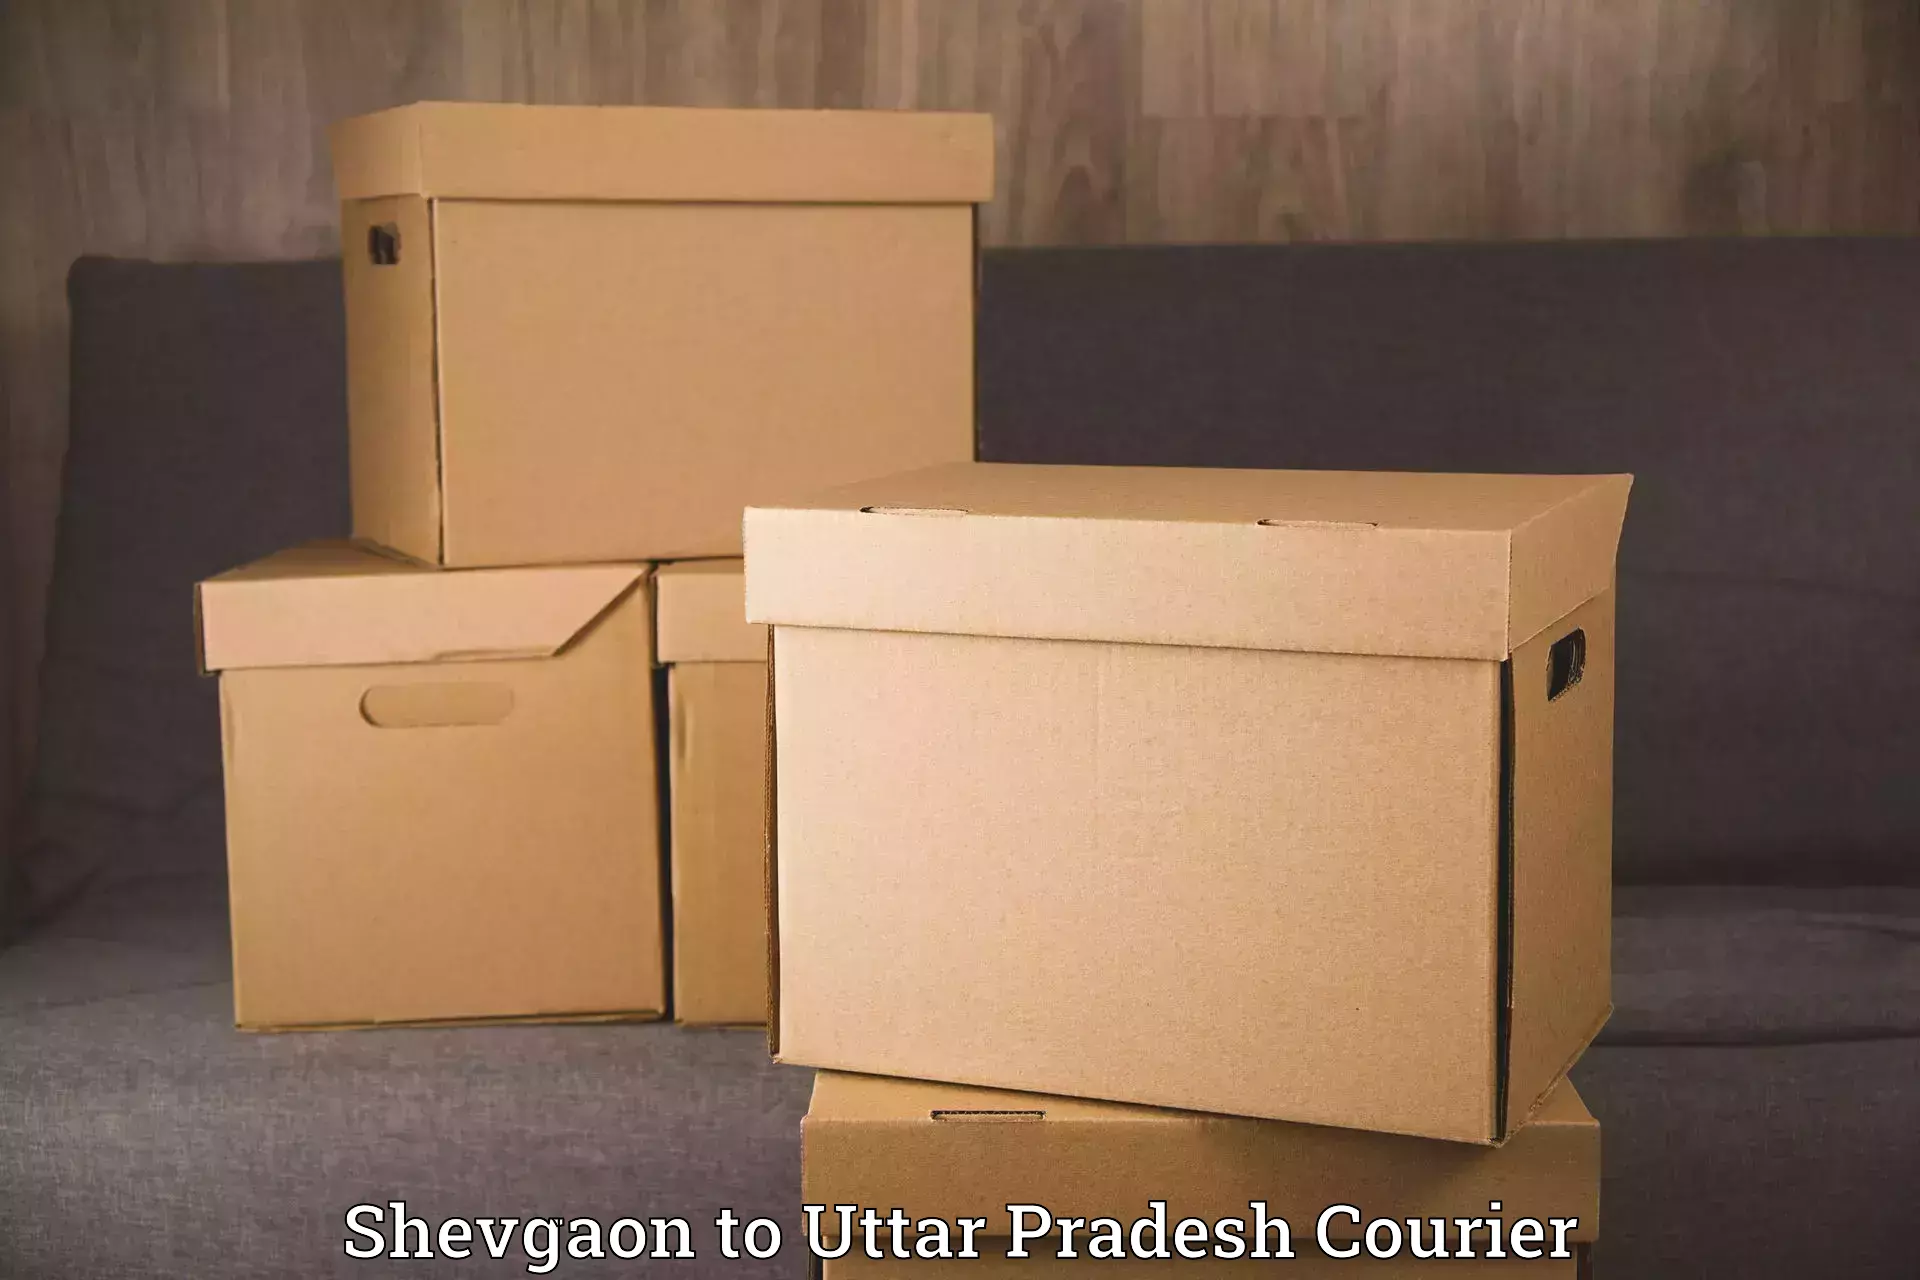 Furniture transport specialists Shevgaon to Agra